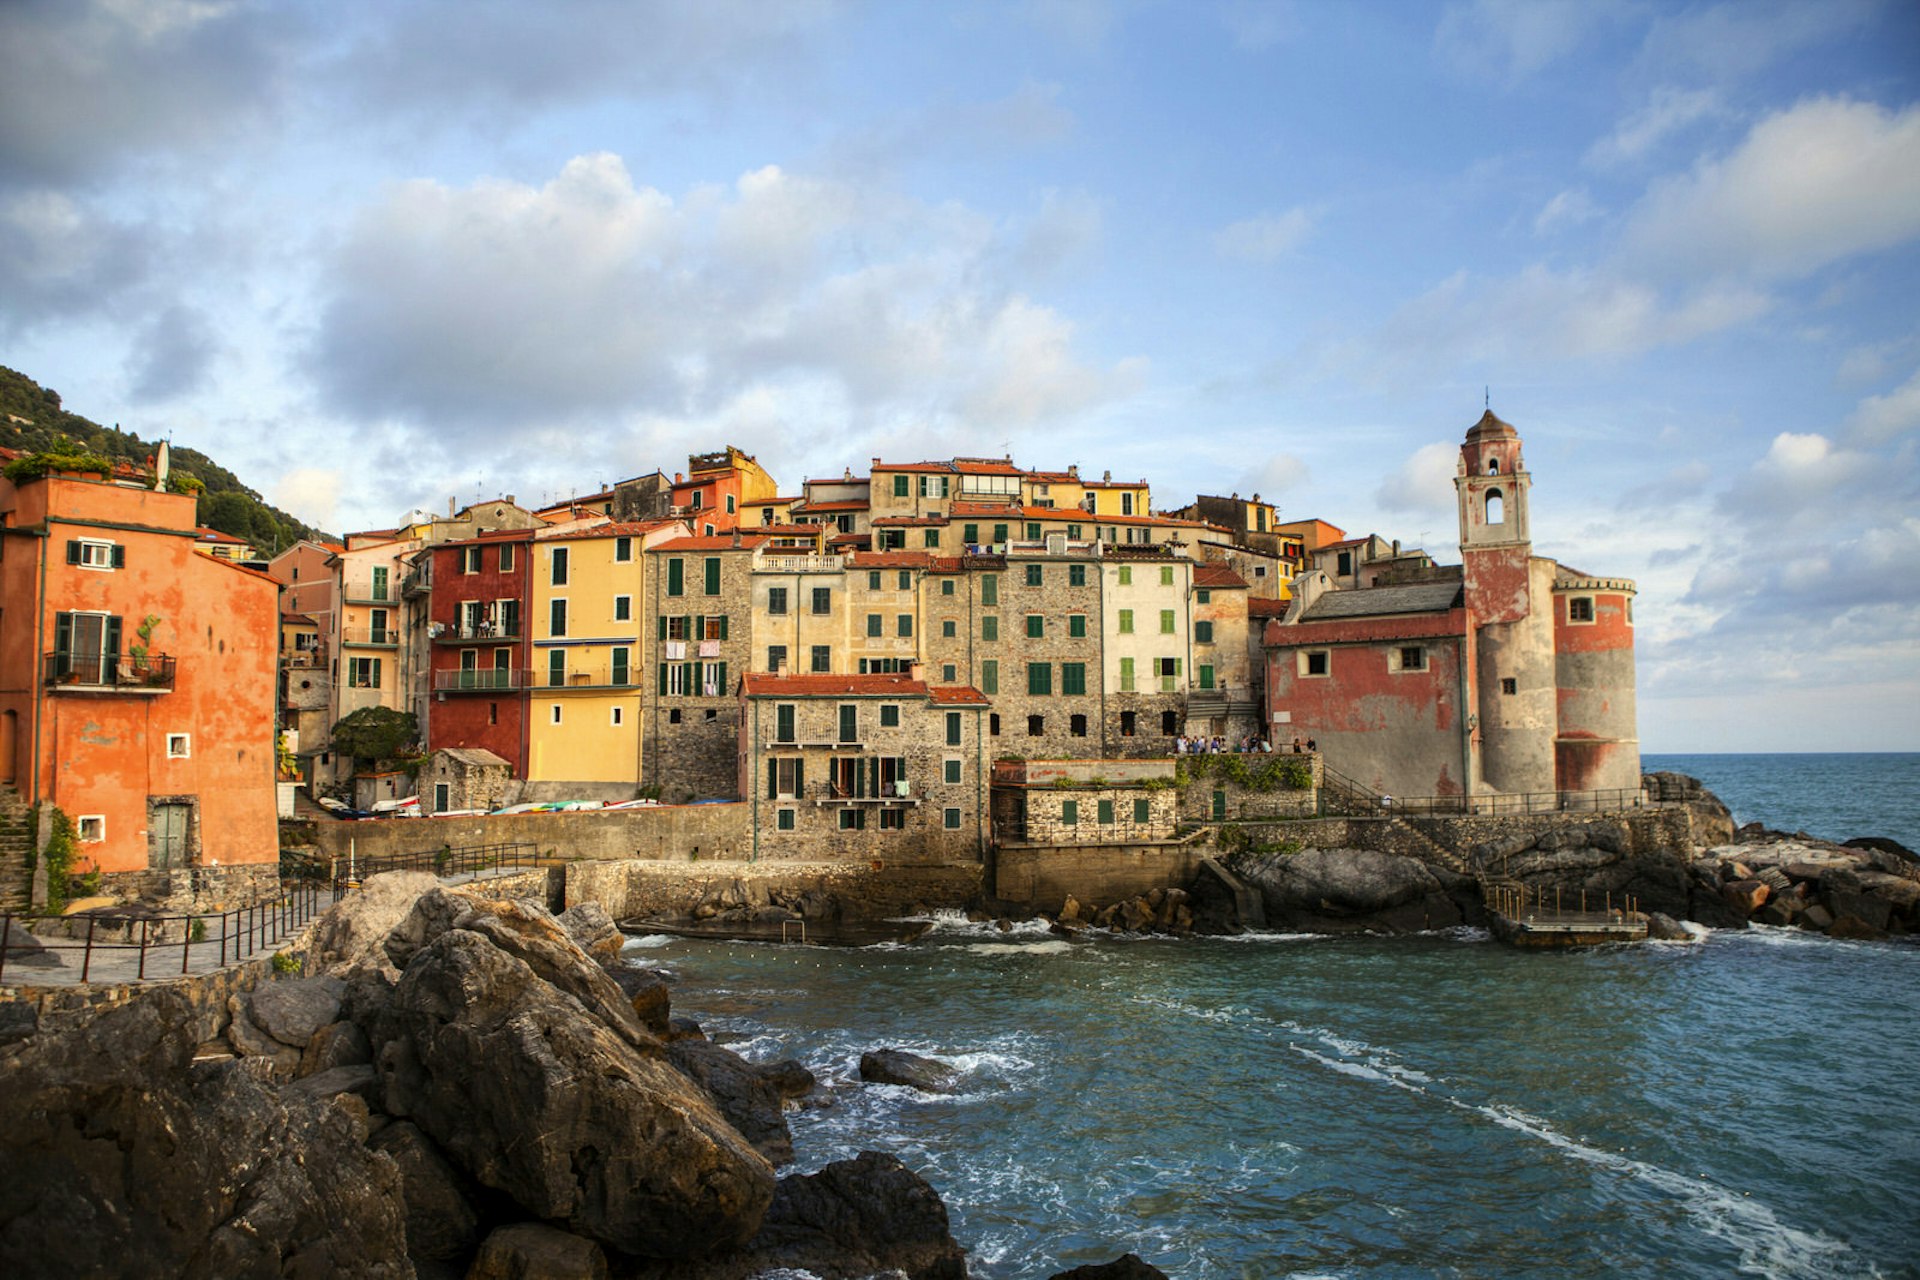 Tellaro's small harbour on a slightly overcast day. Narrow brick buildings are crammed in, side by side on a rocky outcrop. The buildings are warm yellows, beige, orange and terracotta. Closest to the sea there is a faded pink church. The sea is restless.